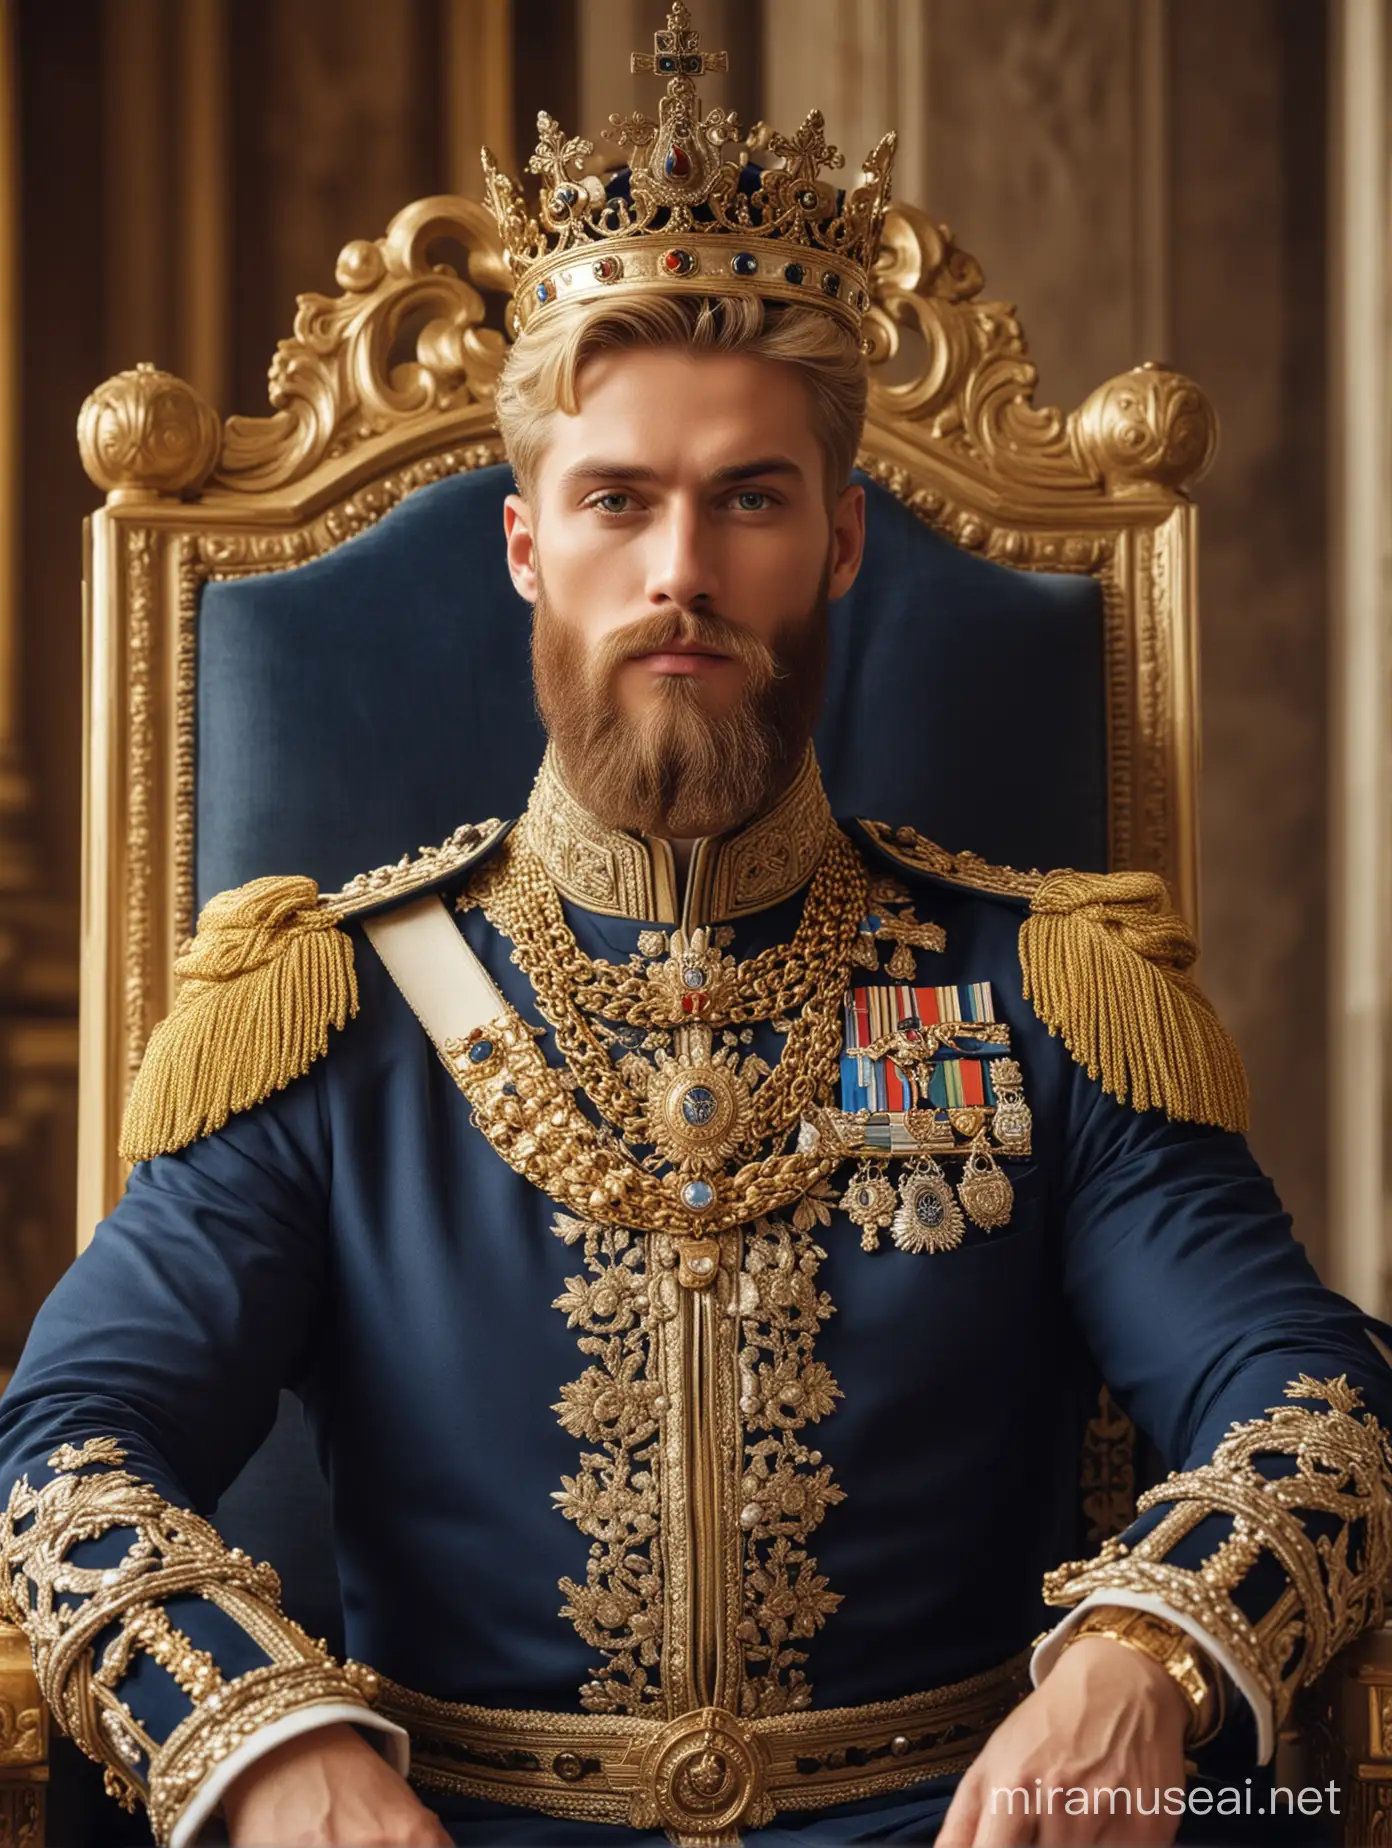 Tall and handsome muscular king with beautiful blonde hairstyle and beard with attractive eyes and Big wide shoulder in navy and golden cavalry suit with crown on head and necklace seating on throne inside palace